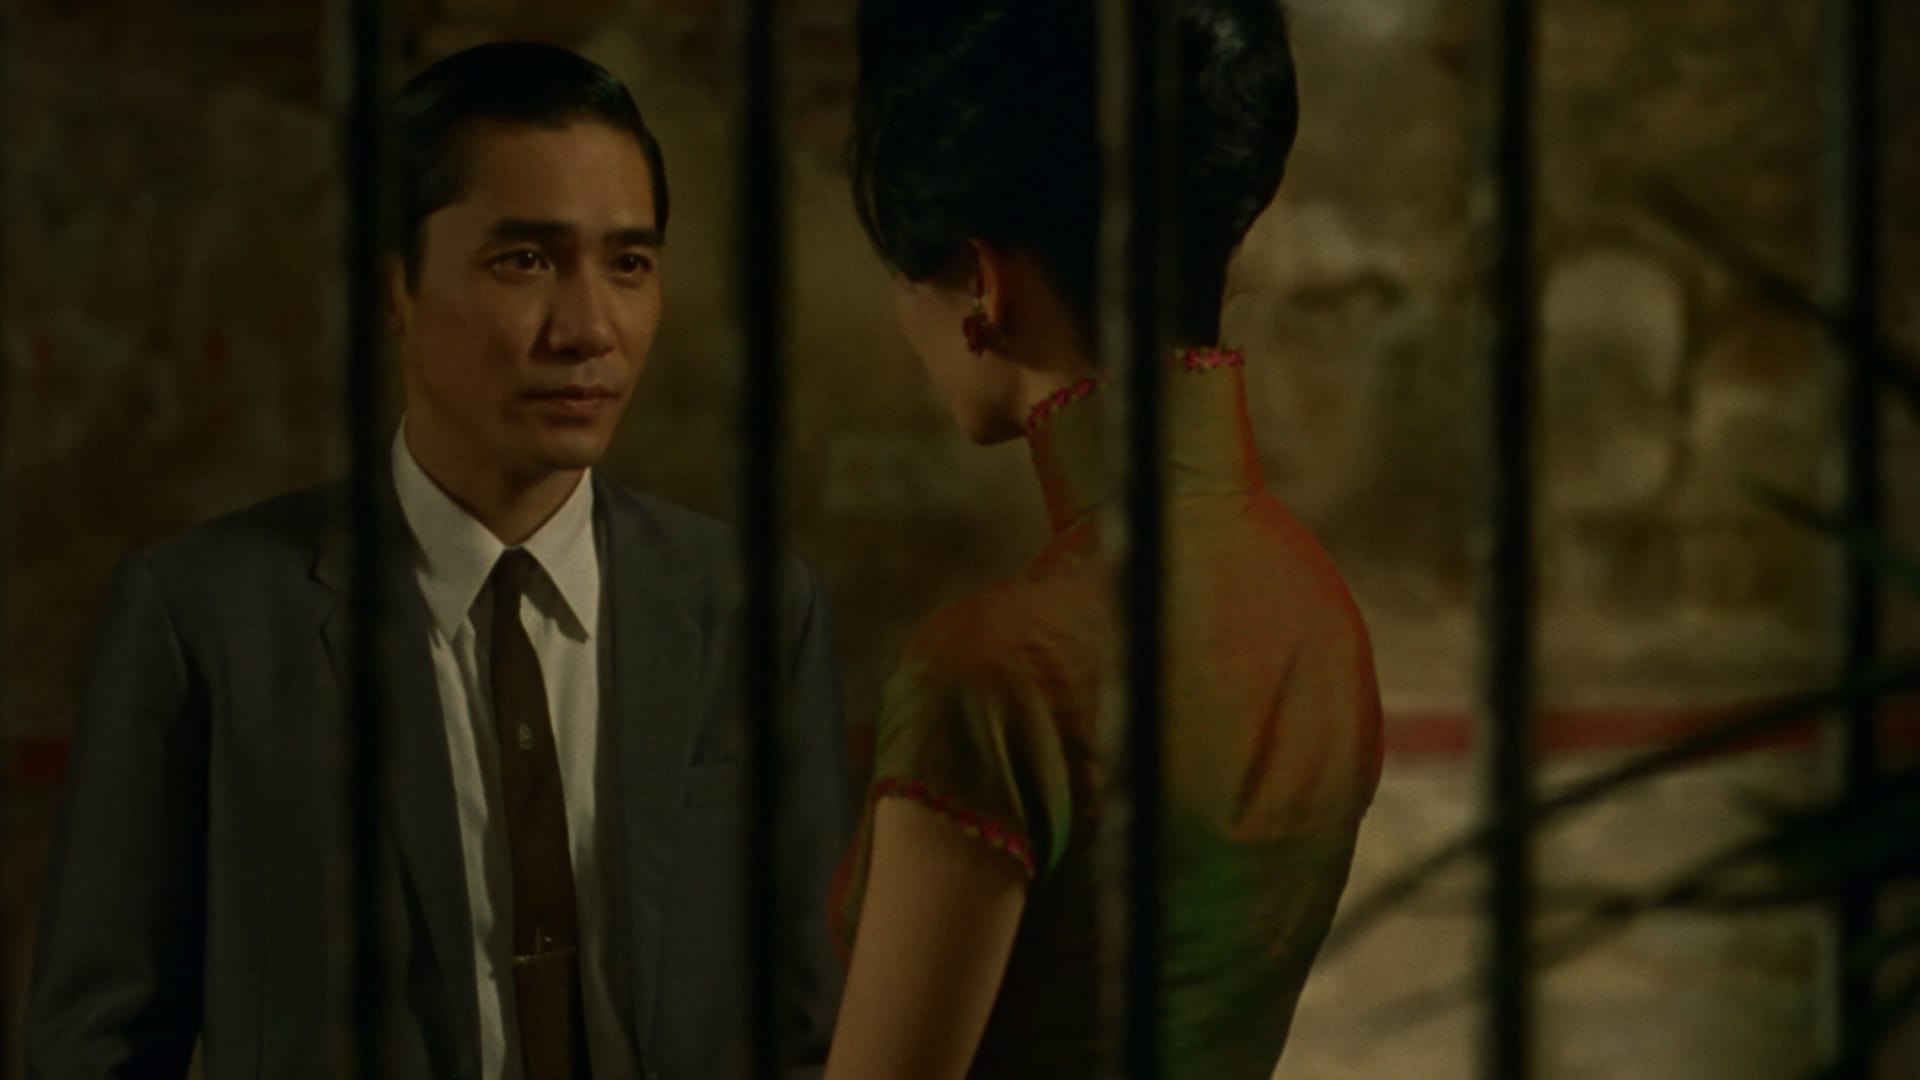 Image du film In the Mood for Love i47cby5dhlhygxh9tzfll6unxw5jpg